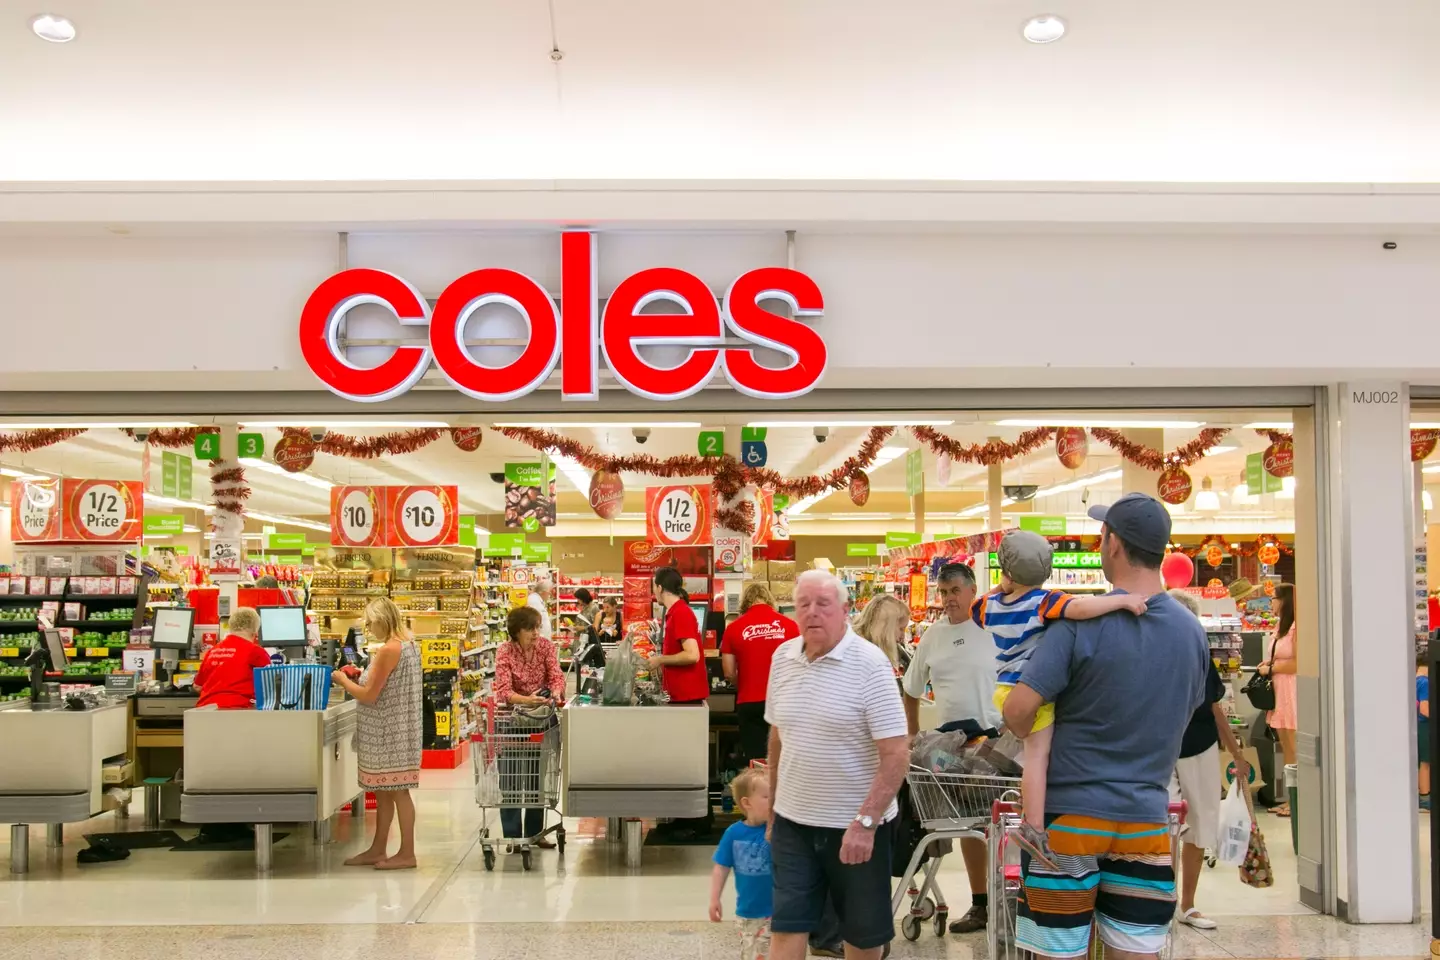 Coles... How COULD you!?